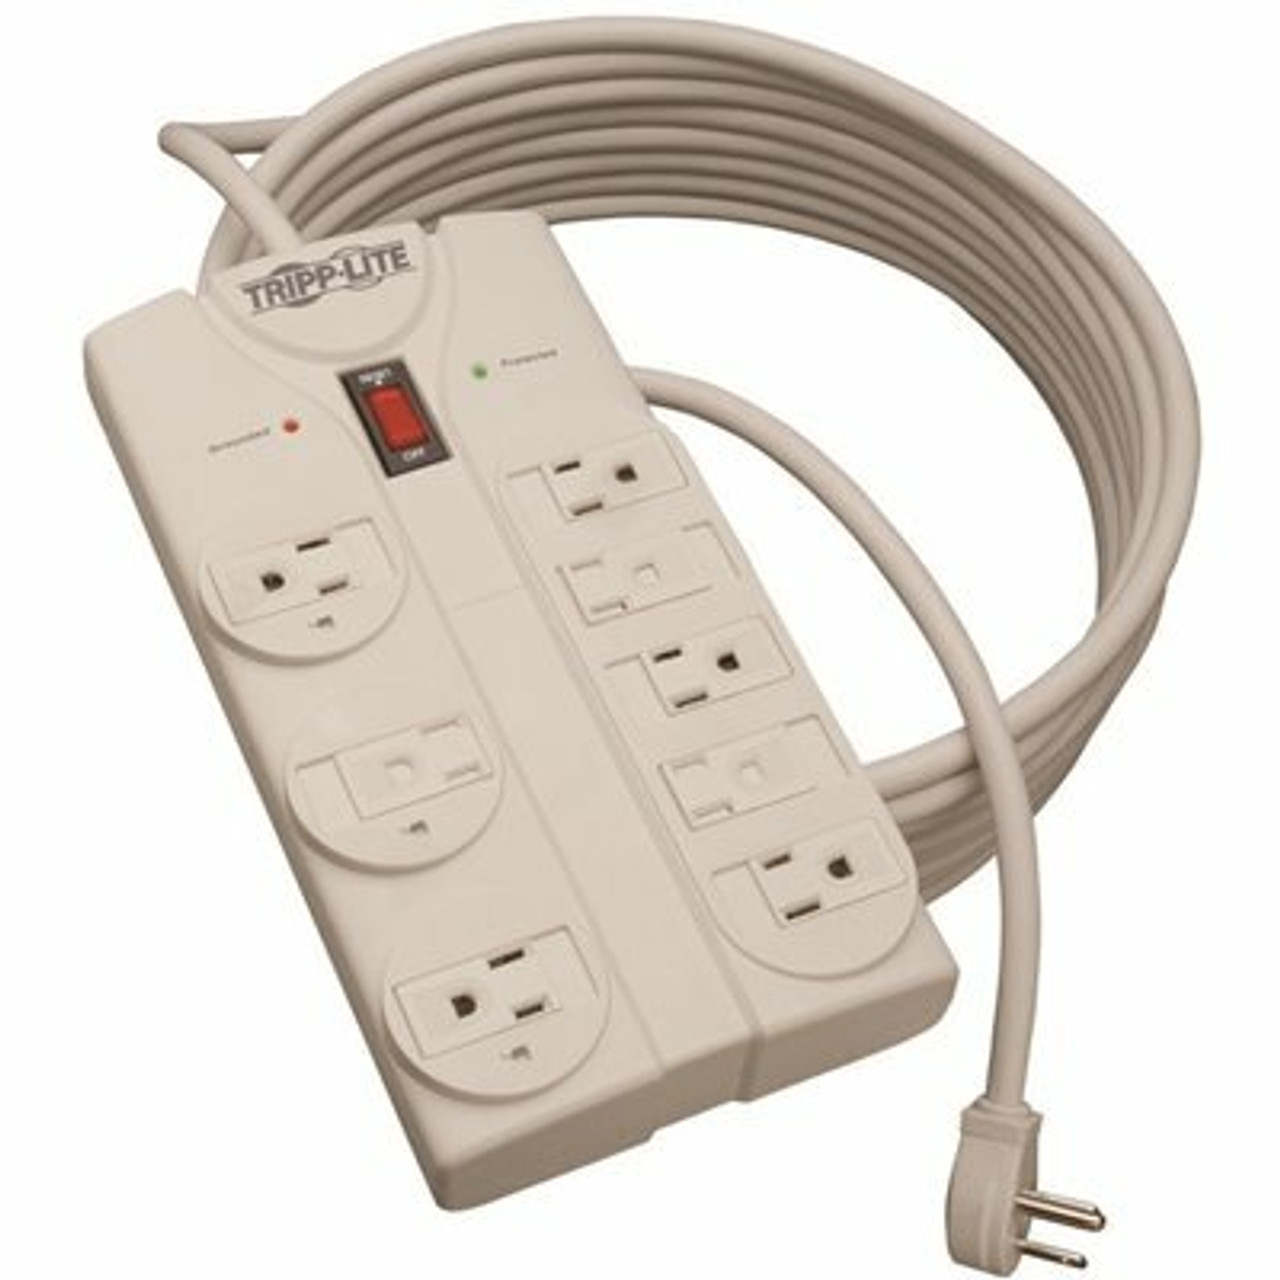 Tripp Lite Protect It 25 Ft. Cord With 8-Outlet Strip